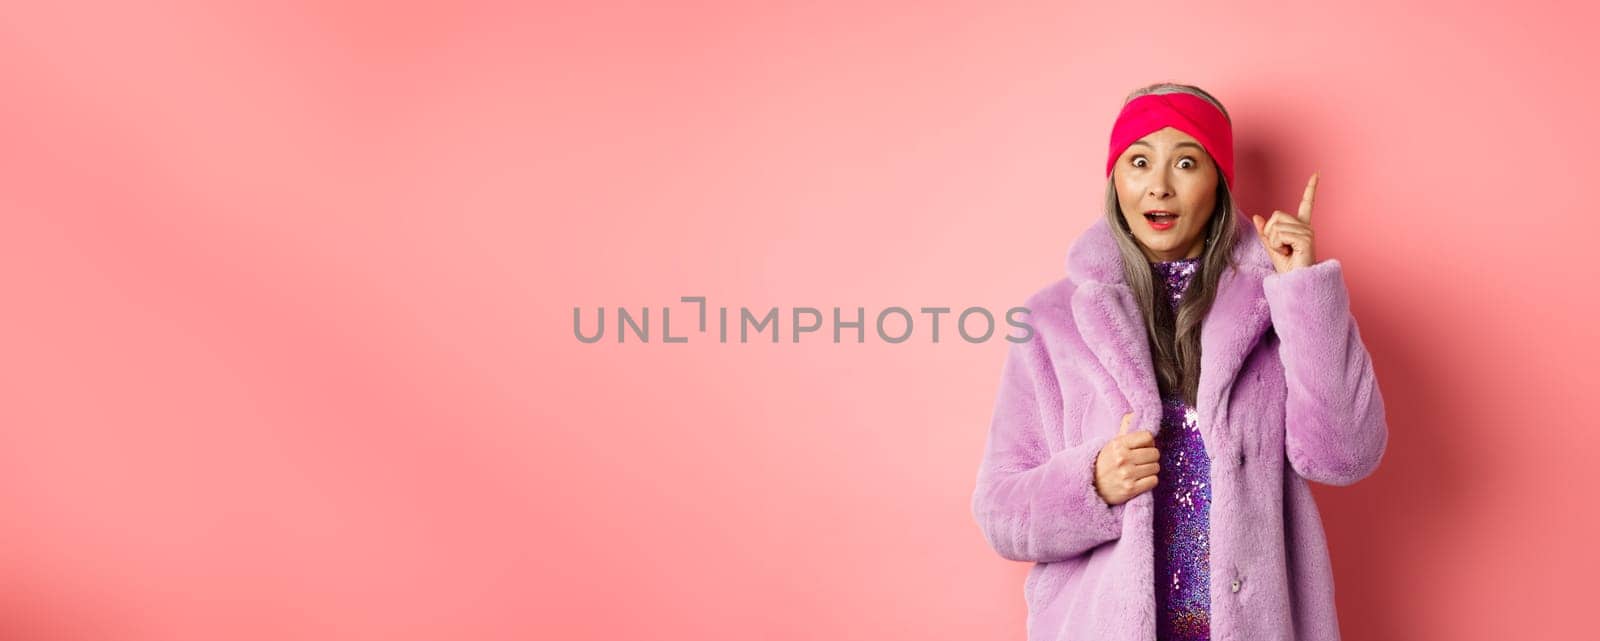 Fashion and shopping concept. Smiling elderly woman having an idea. Stylish old lady in purple fake fur coat raising index finger, suggesting plan, standing excited on pink background.